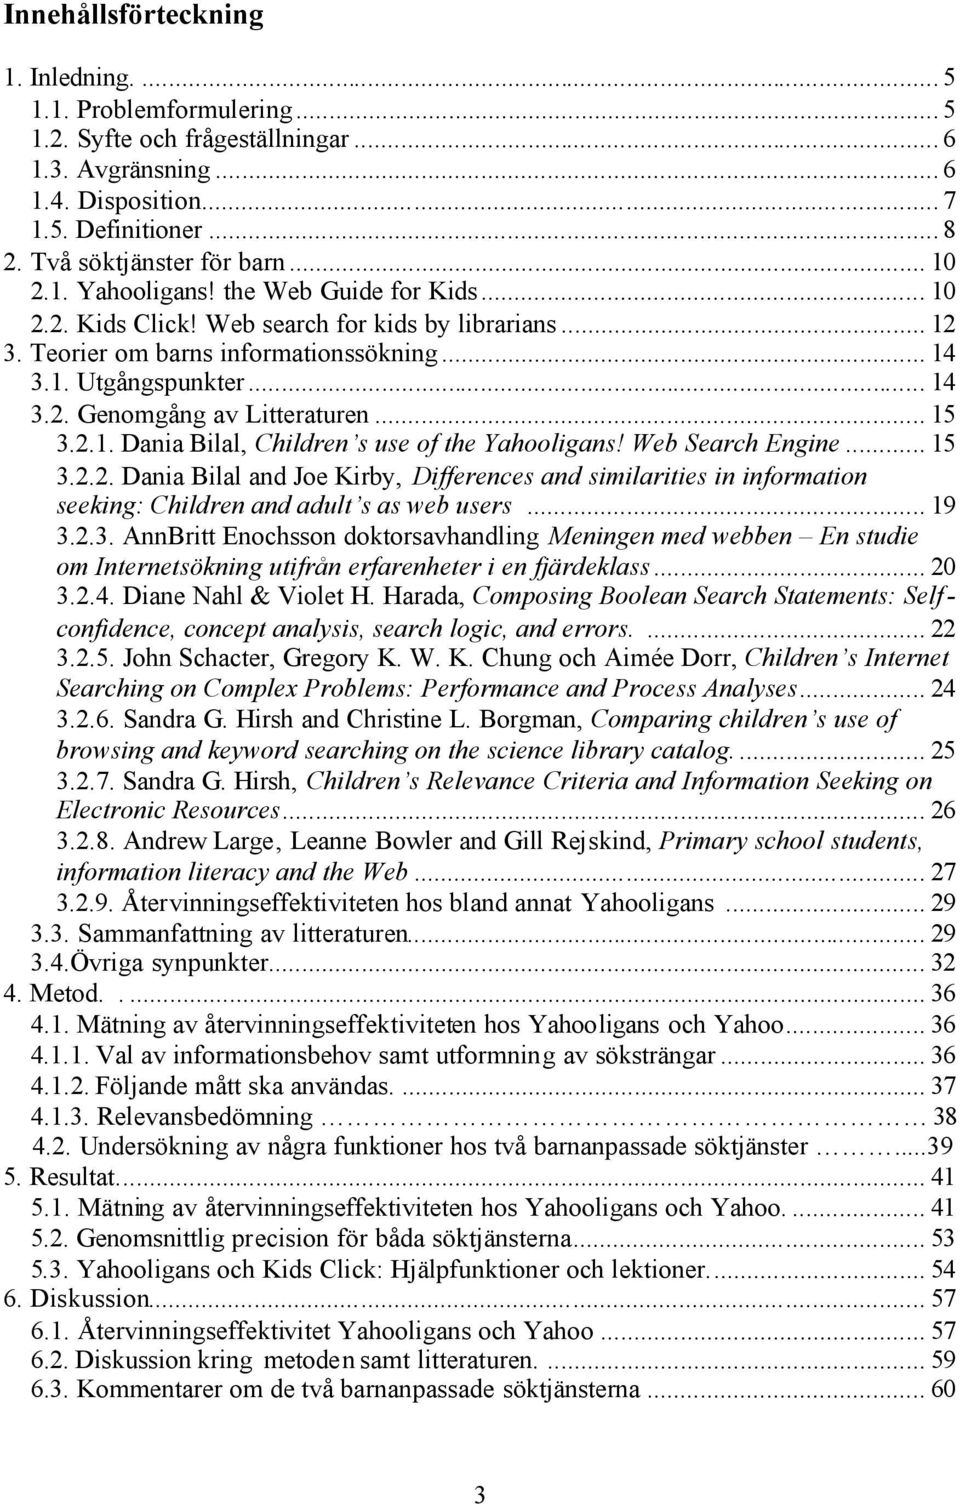 .. 14 3.2. Genomgång av Litteraturen... 15 3.2.1. Dania Bilal, Children s use of the Yahooligans! Web Search Engine... 15 3.2.2. Dania Bilal and Joe Kirby, Differences and similarities in information seeking: Children and adult s as web users.